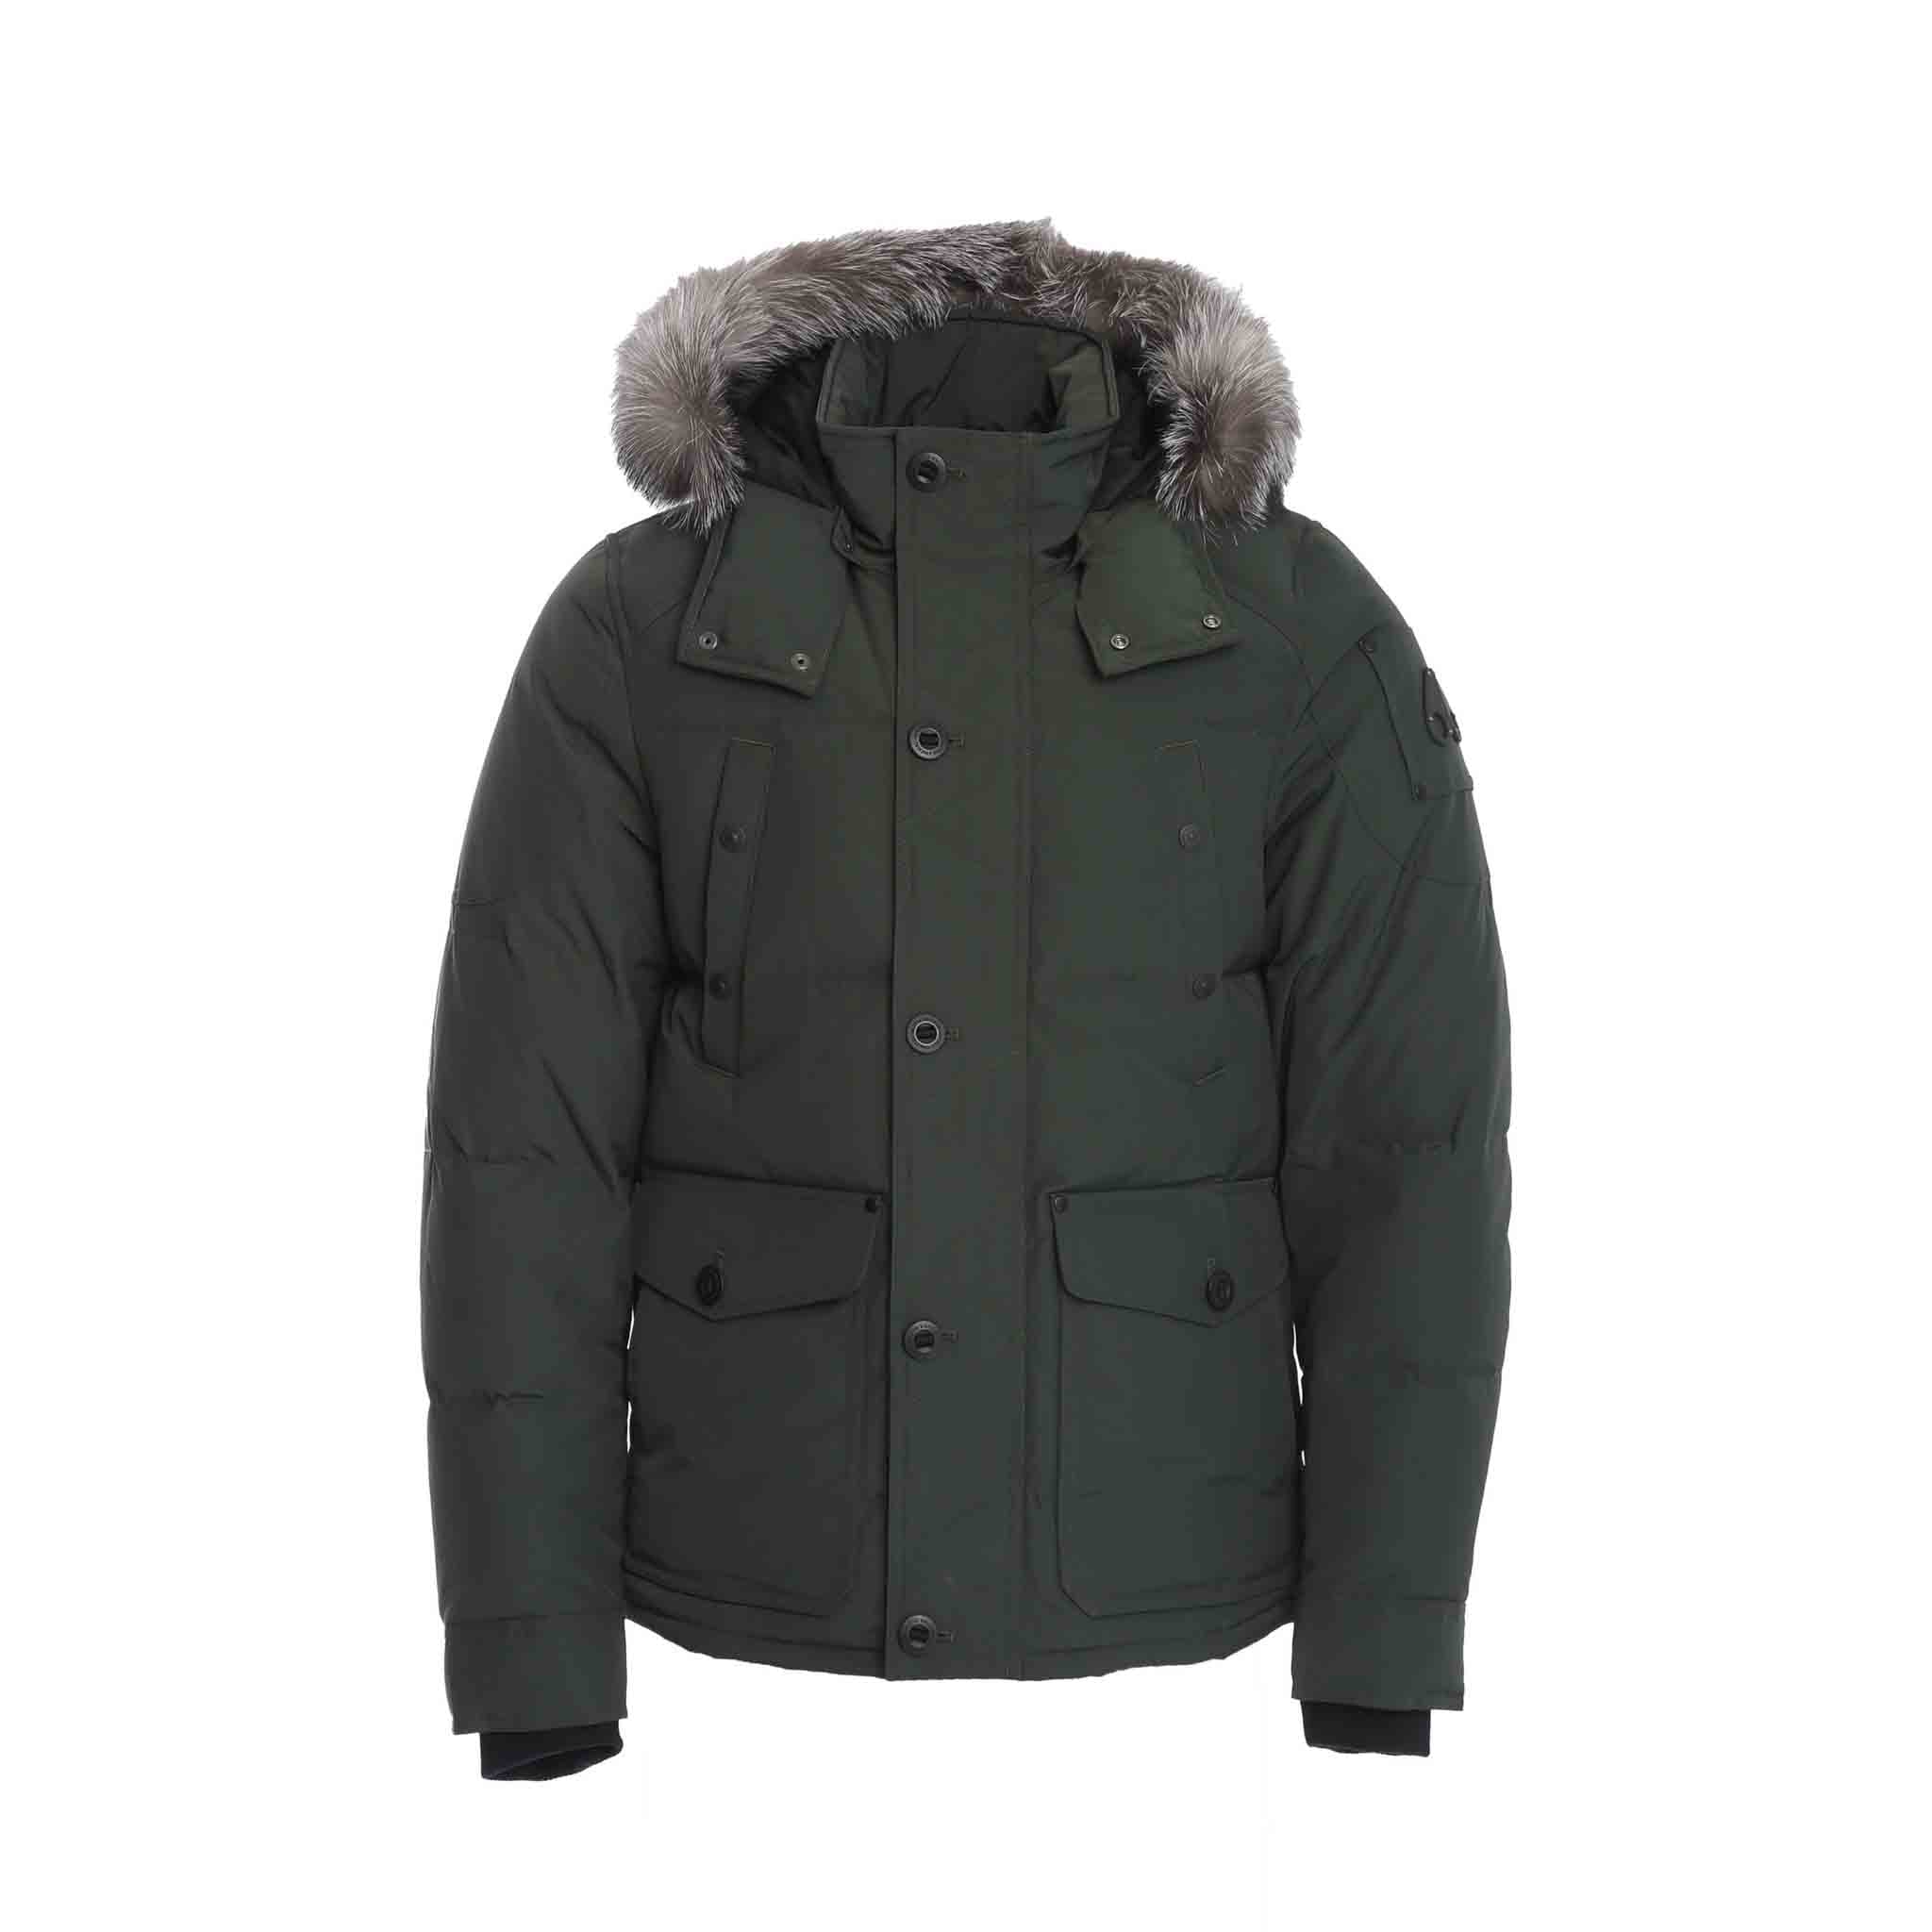 Moose Knuckles Mens Round Island Jacket in Army Green/ Frost Fur Trimmed Hood